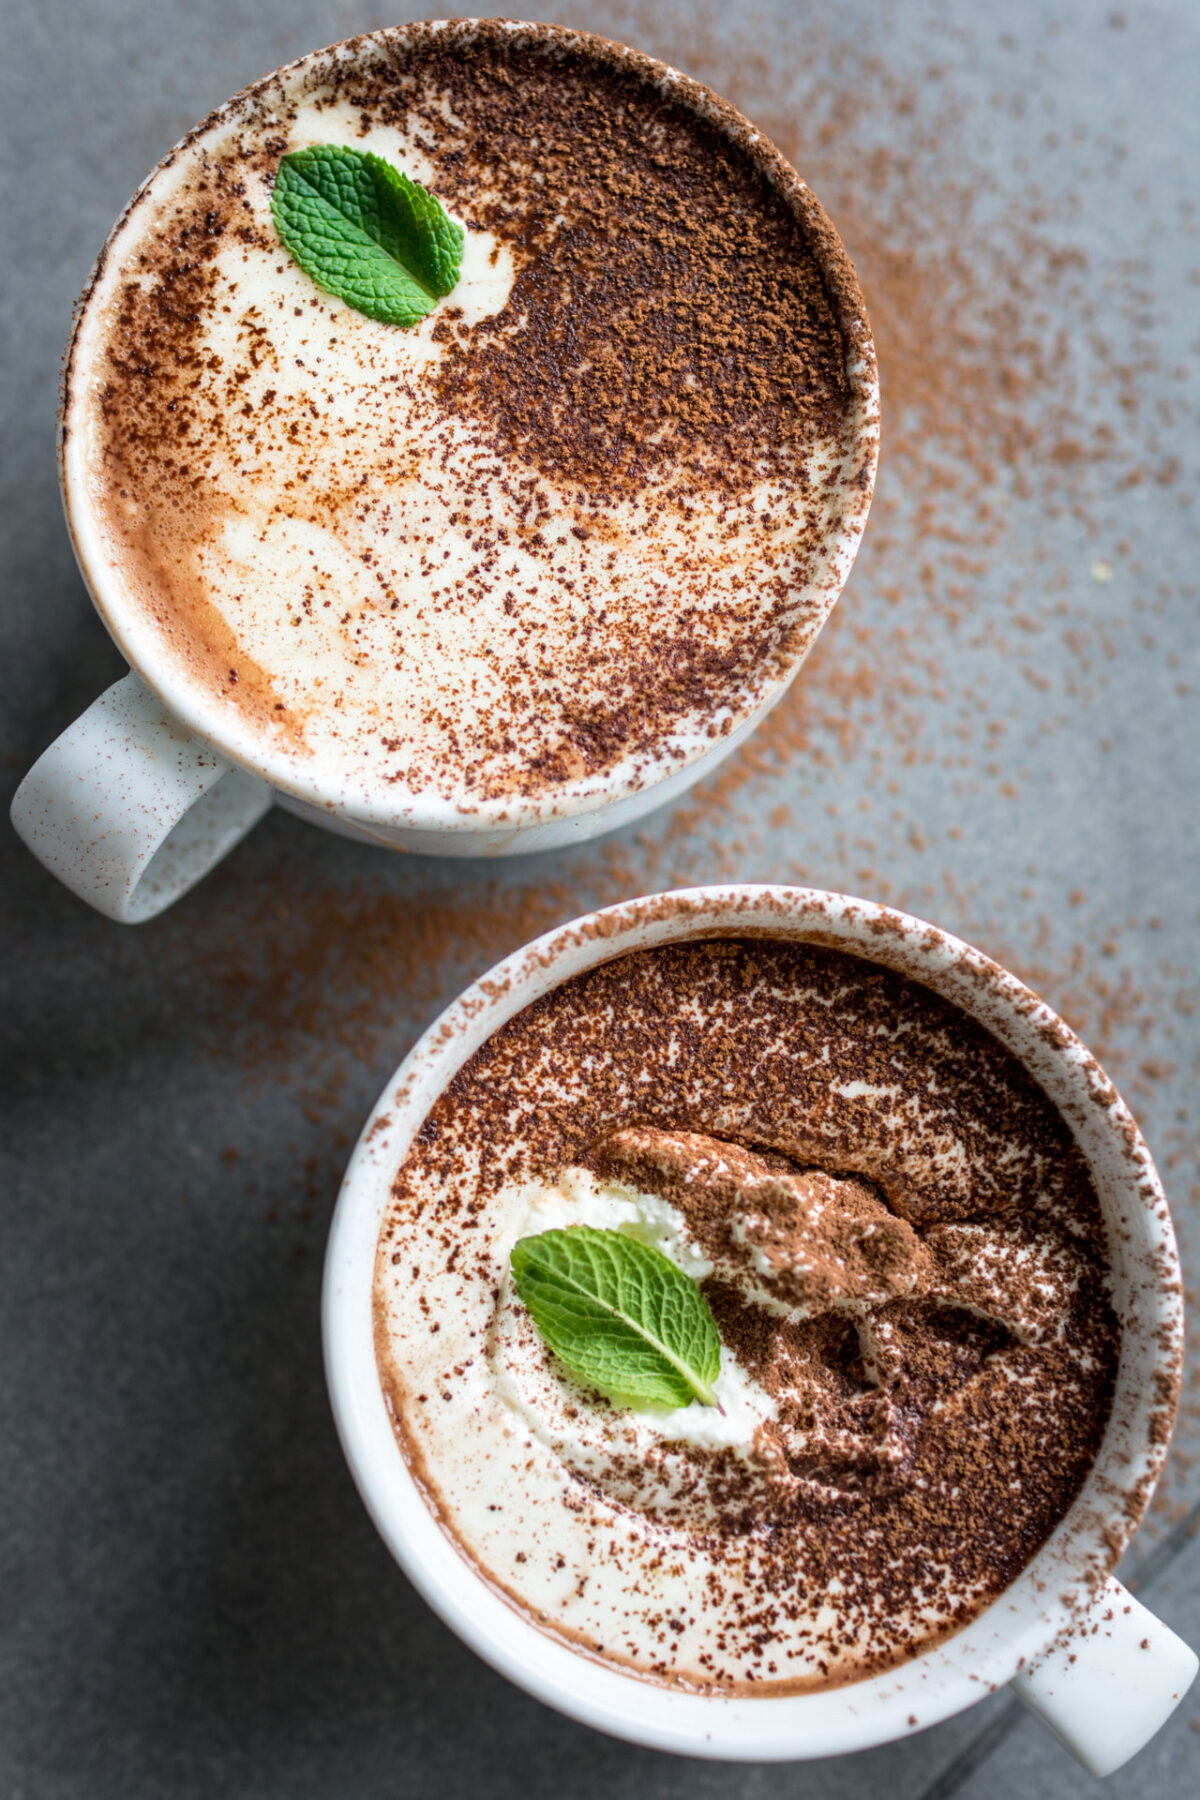 Top view of two cups of dairy-free peppermint hot chocolate with cocoa sprinkled on top and garnished with a mint leaf.